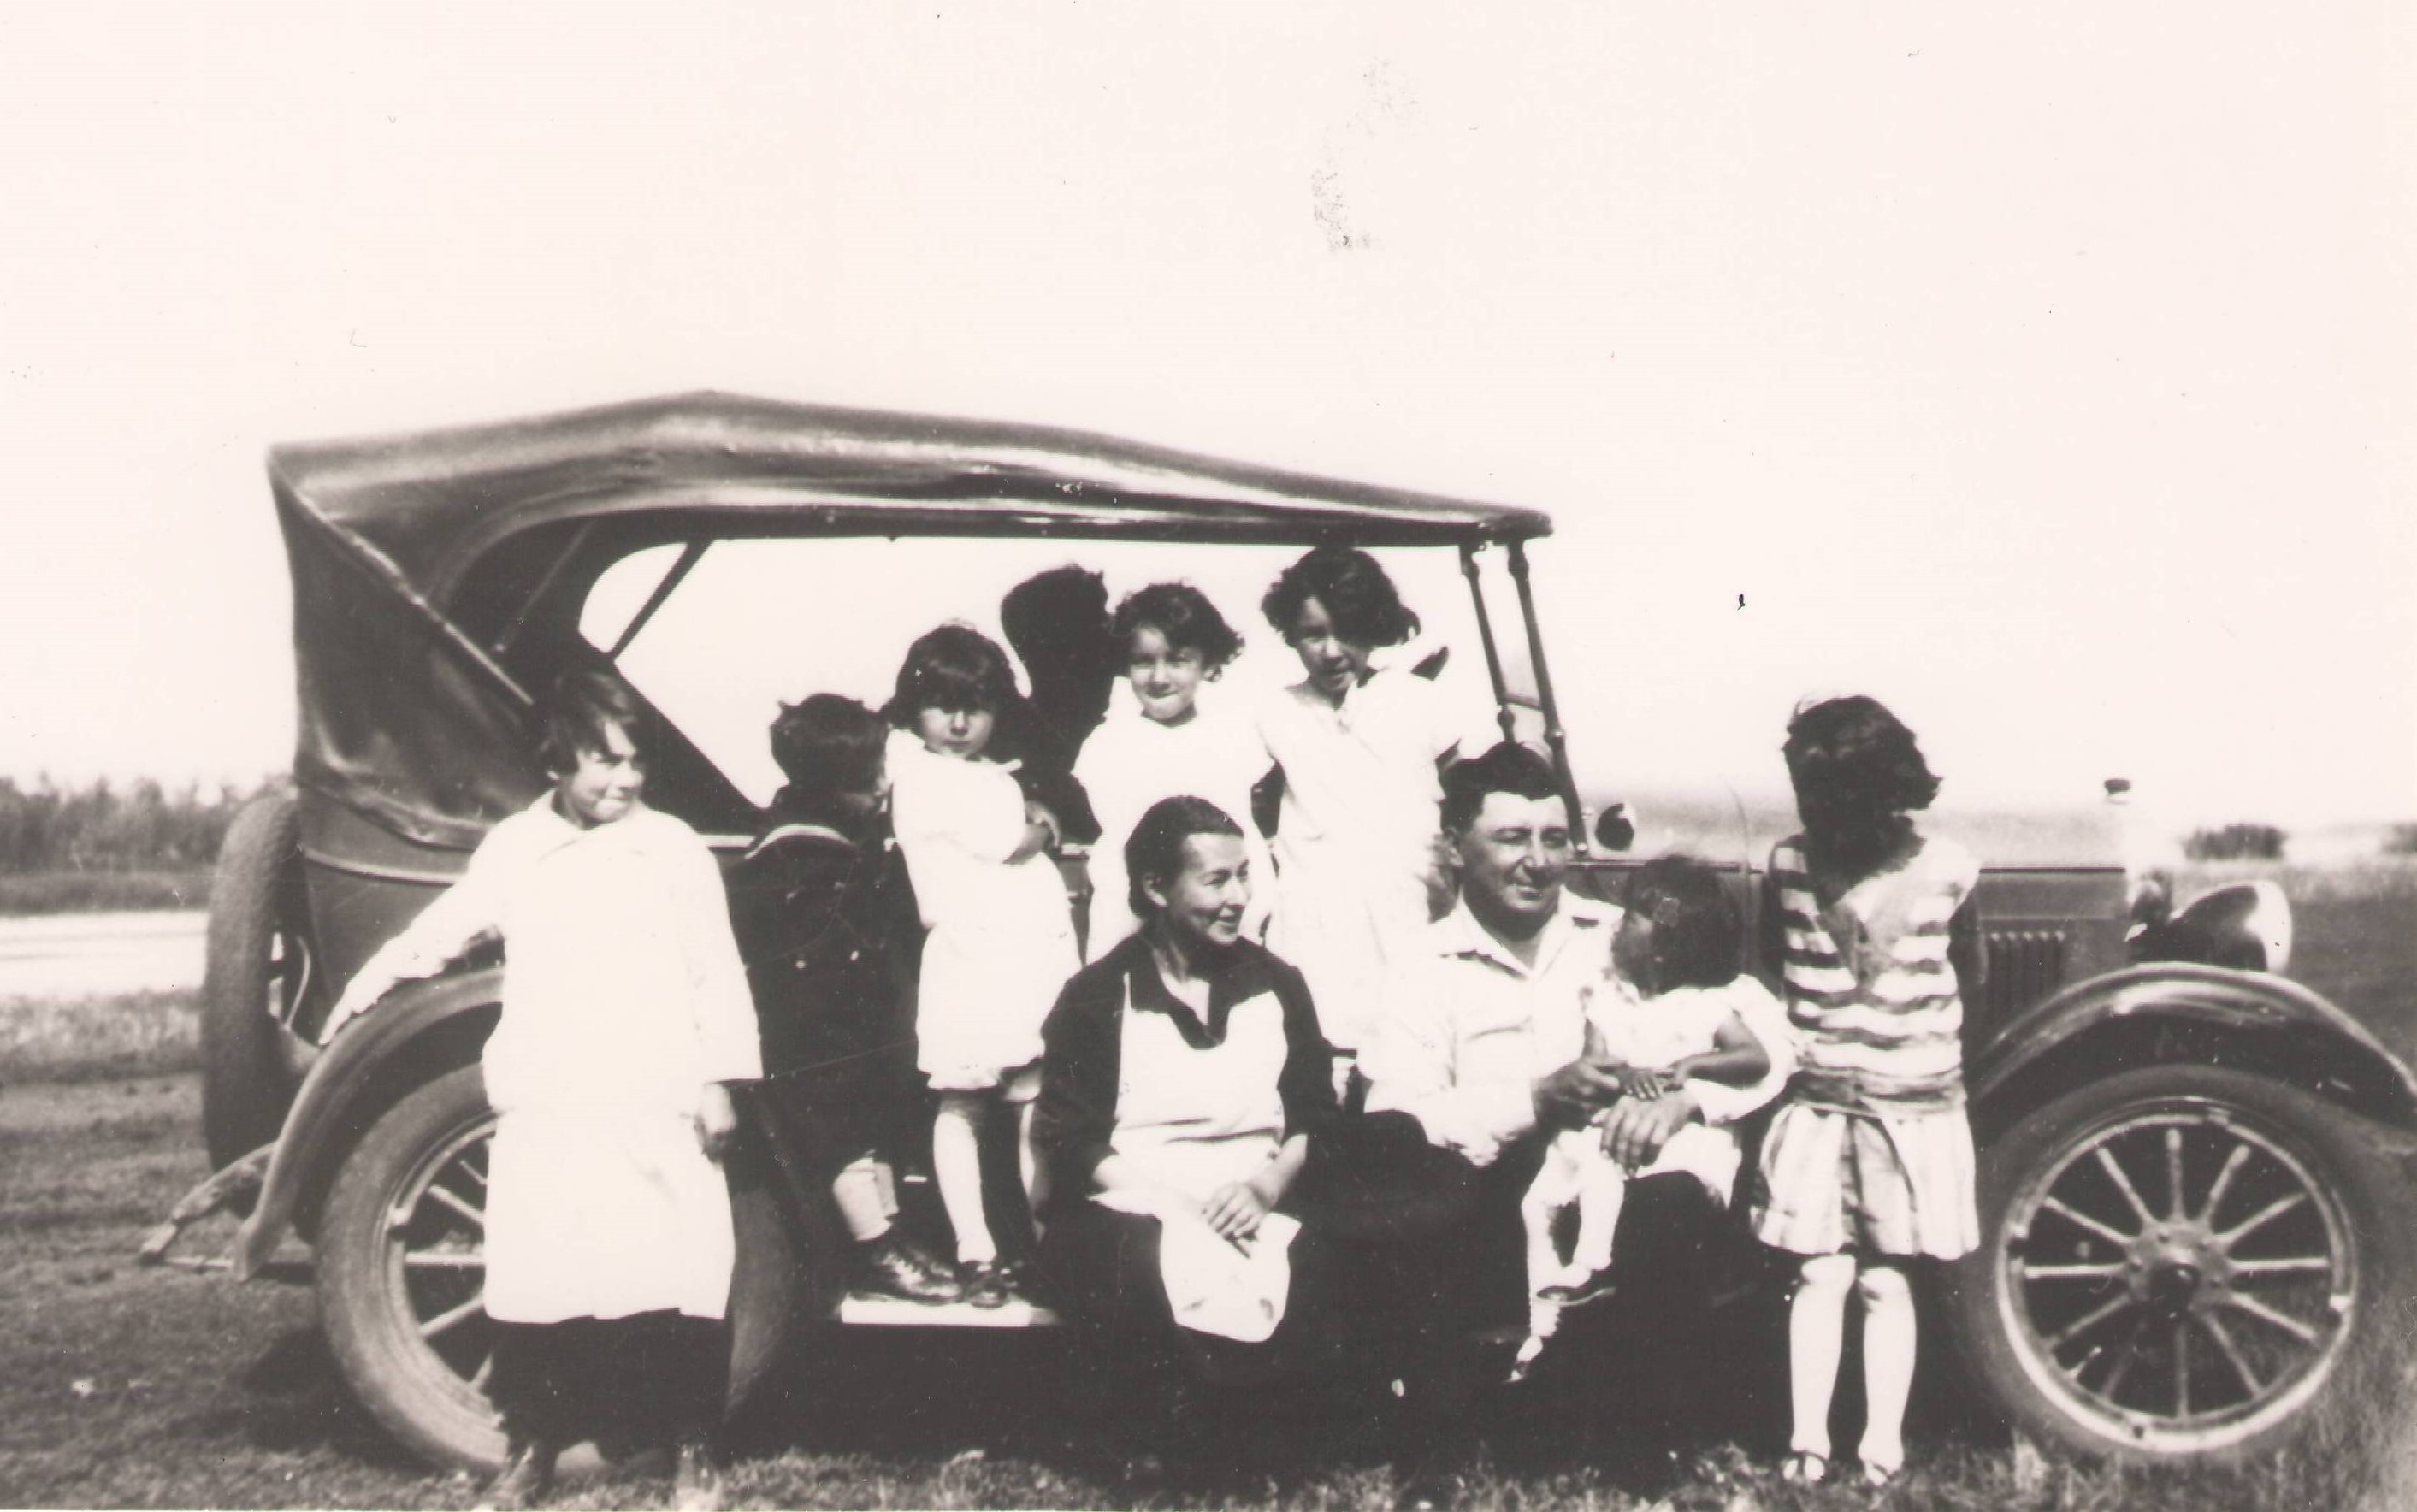 This appears to be a family enjoying their time with what appears to be a 1926 model T Ford Car. Many of the childrens faces cannot be seen but we are hoping you can help us identify the parent couple and some of the children if possible!
990.4.79.235 / Reid, Gordon